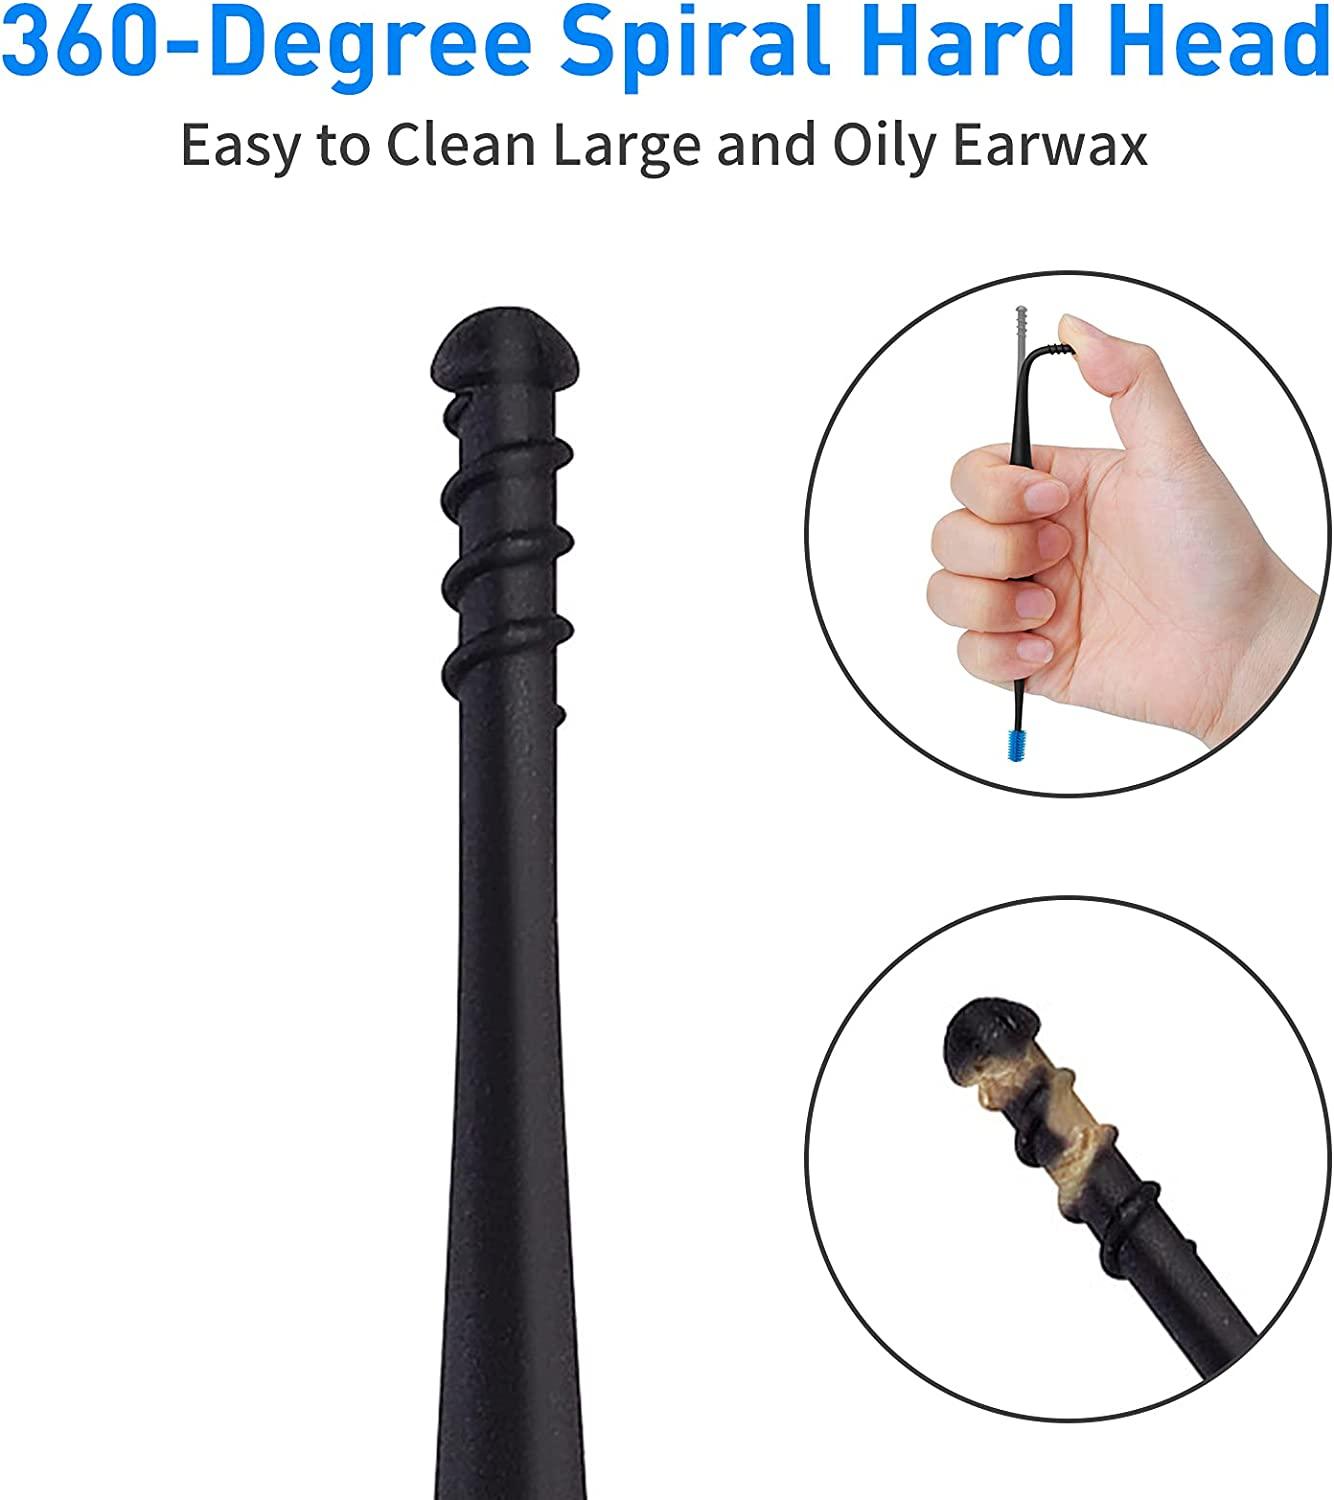 The Most DANGEROUS & Least Effective Earwax Removal Tool EVER